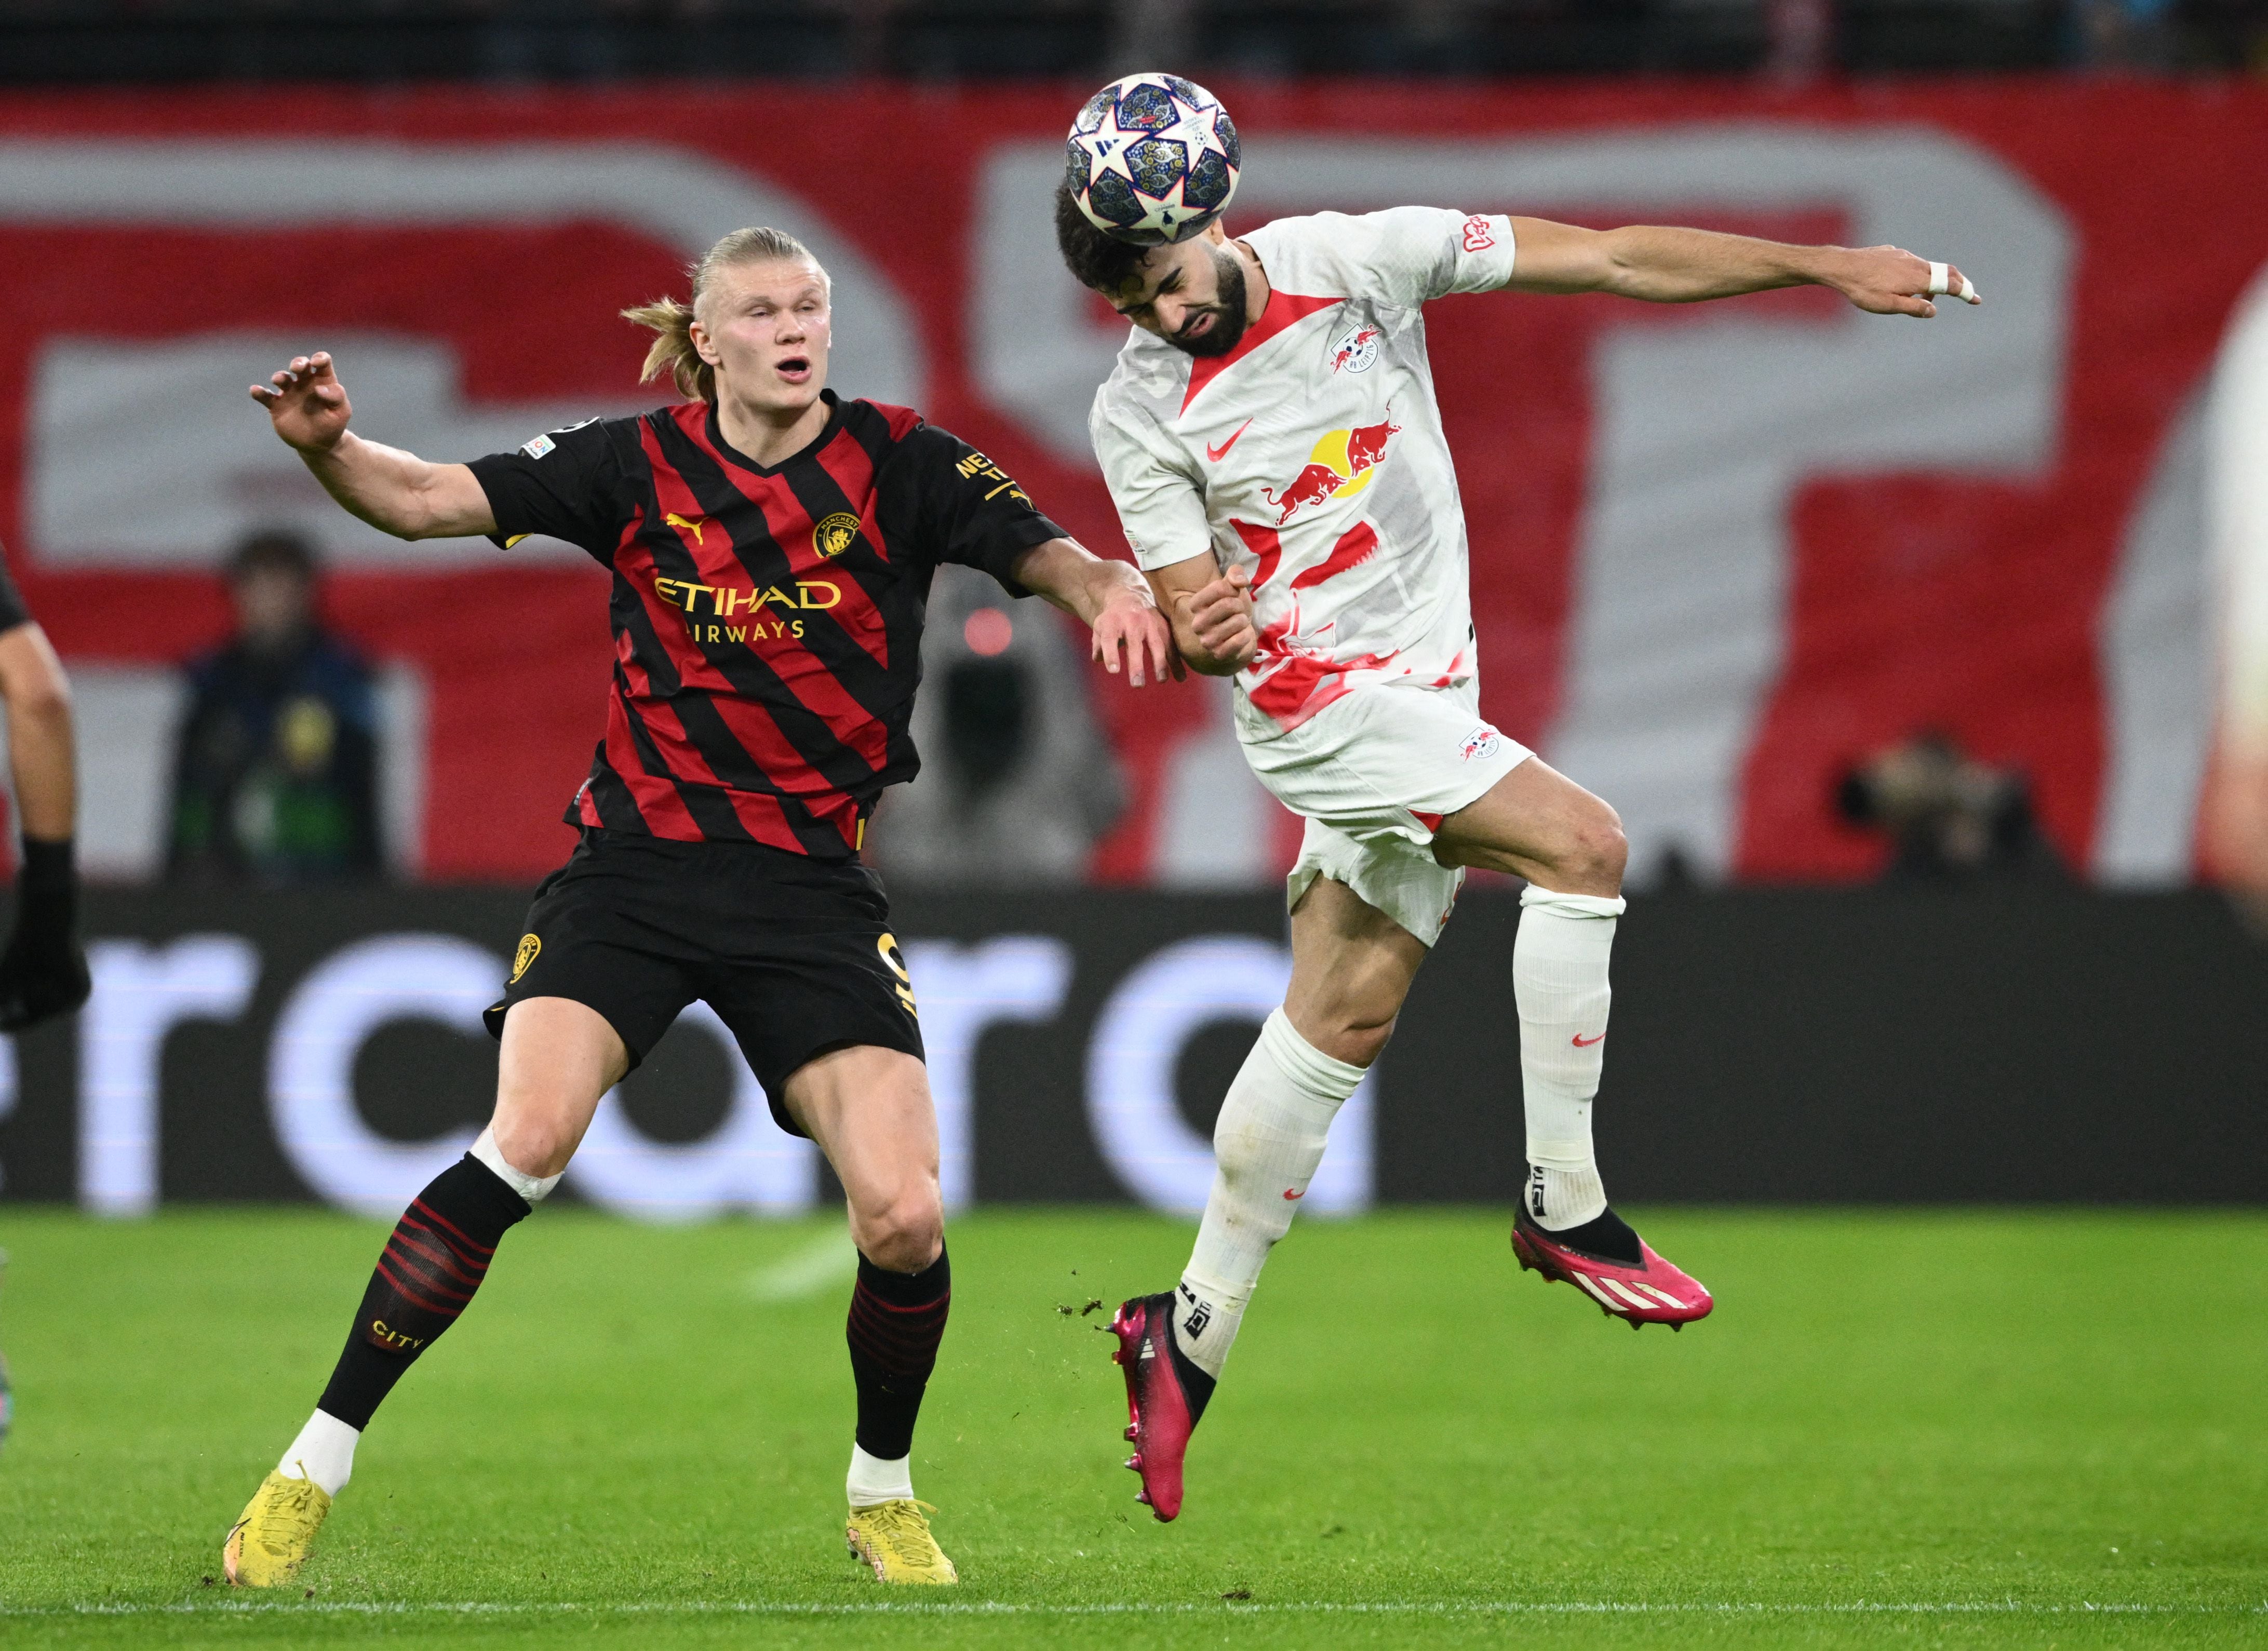 Soccer Football - Champions League - Round of 16 First Leg - RB Leipzig v Manchester City - Red Bull Arena, Leipzig, Germany - February 22, 2023 Manchester City's Erling Braut Haaland in action with RB Leipzig's Josko Gvardiol REUTERS/Annegret Hilse